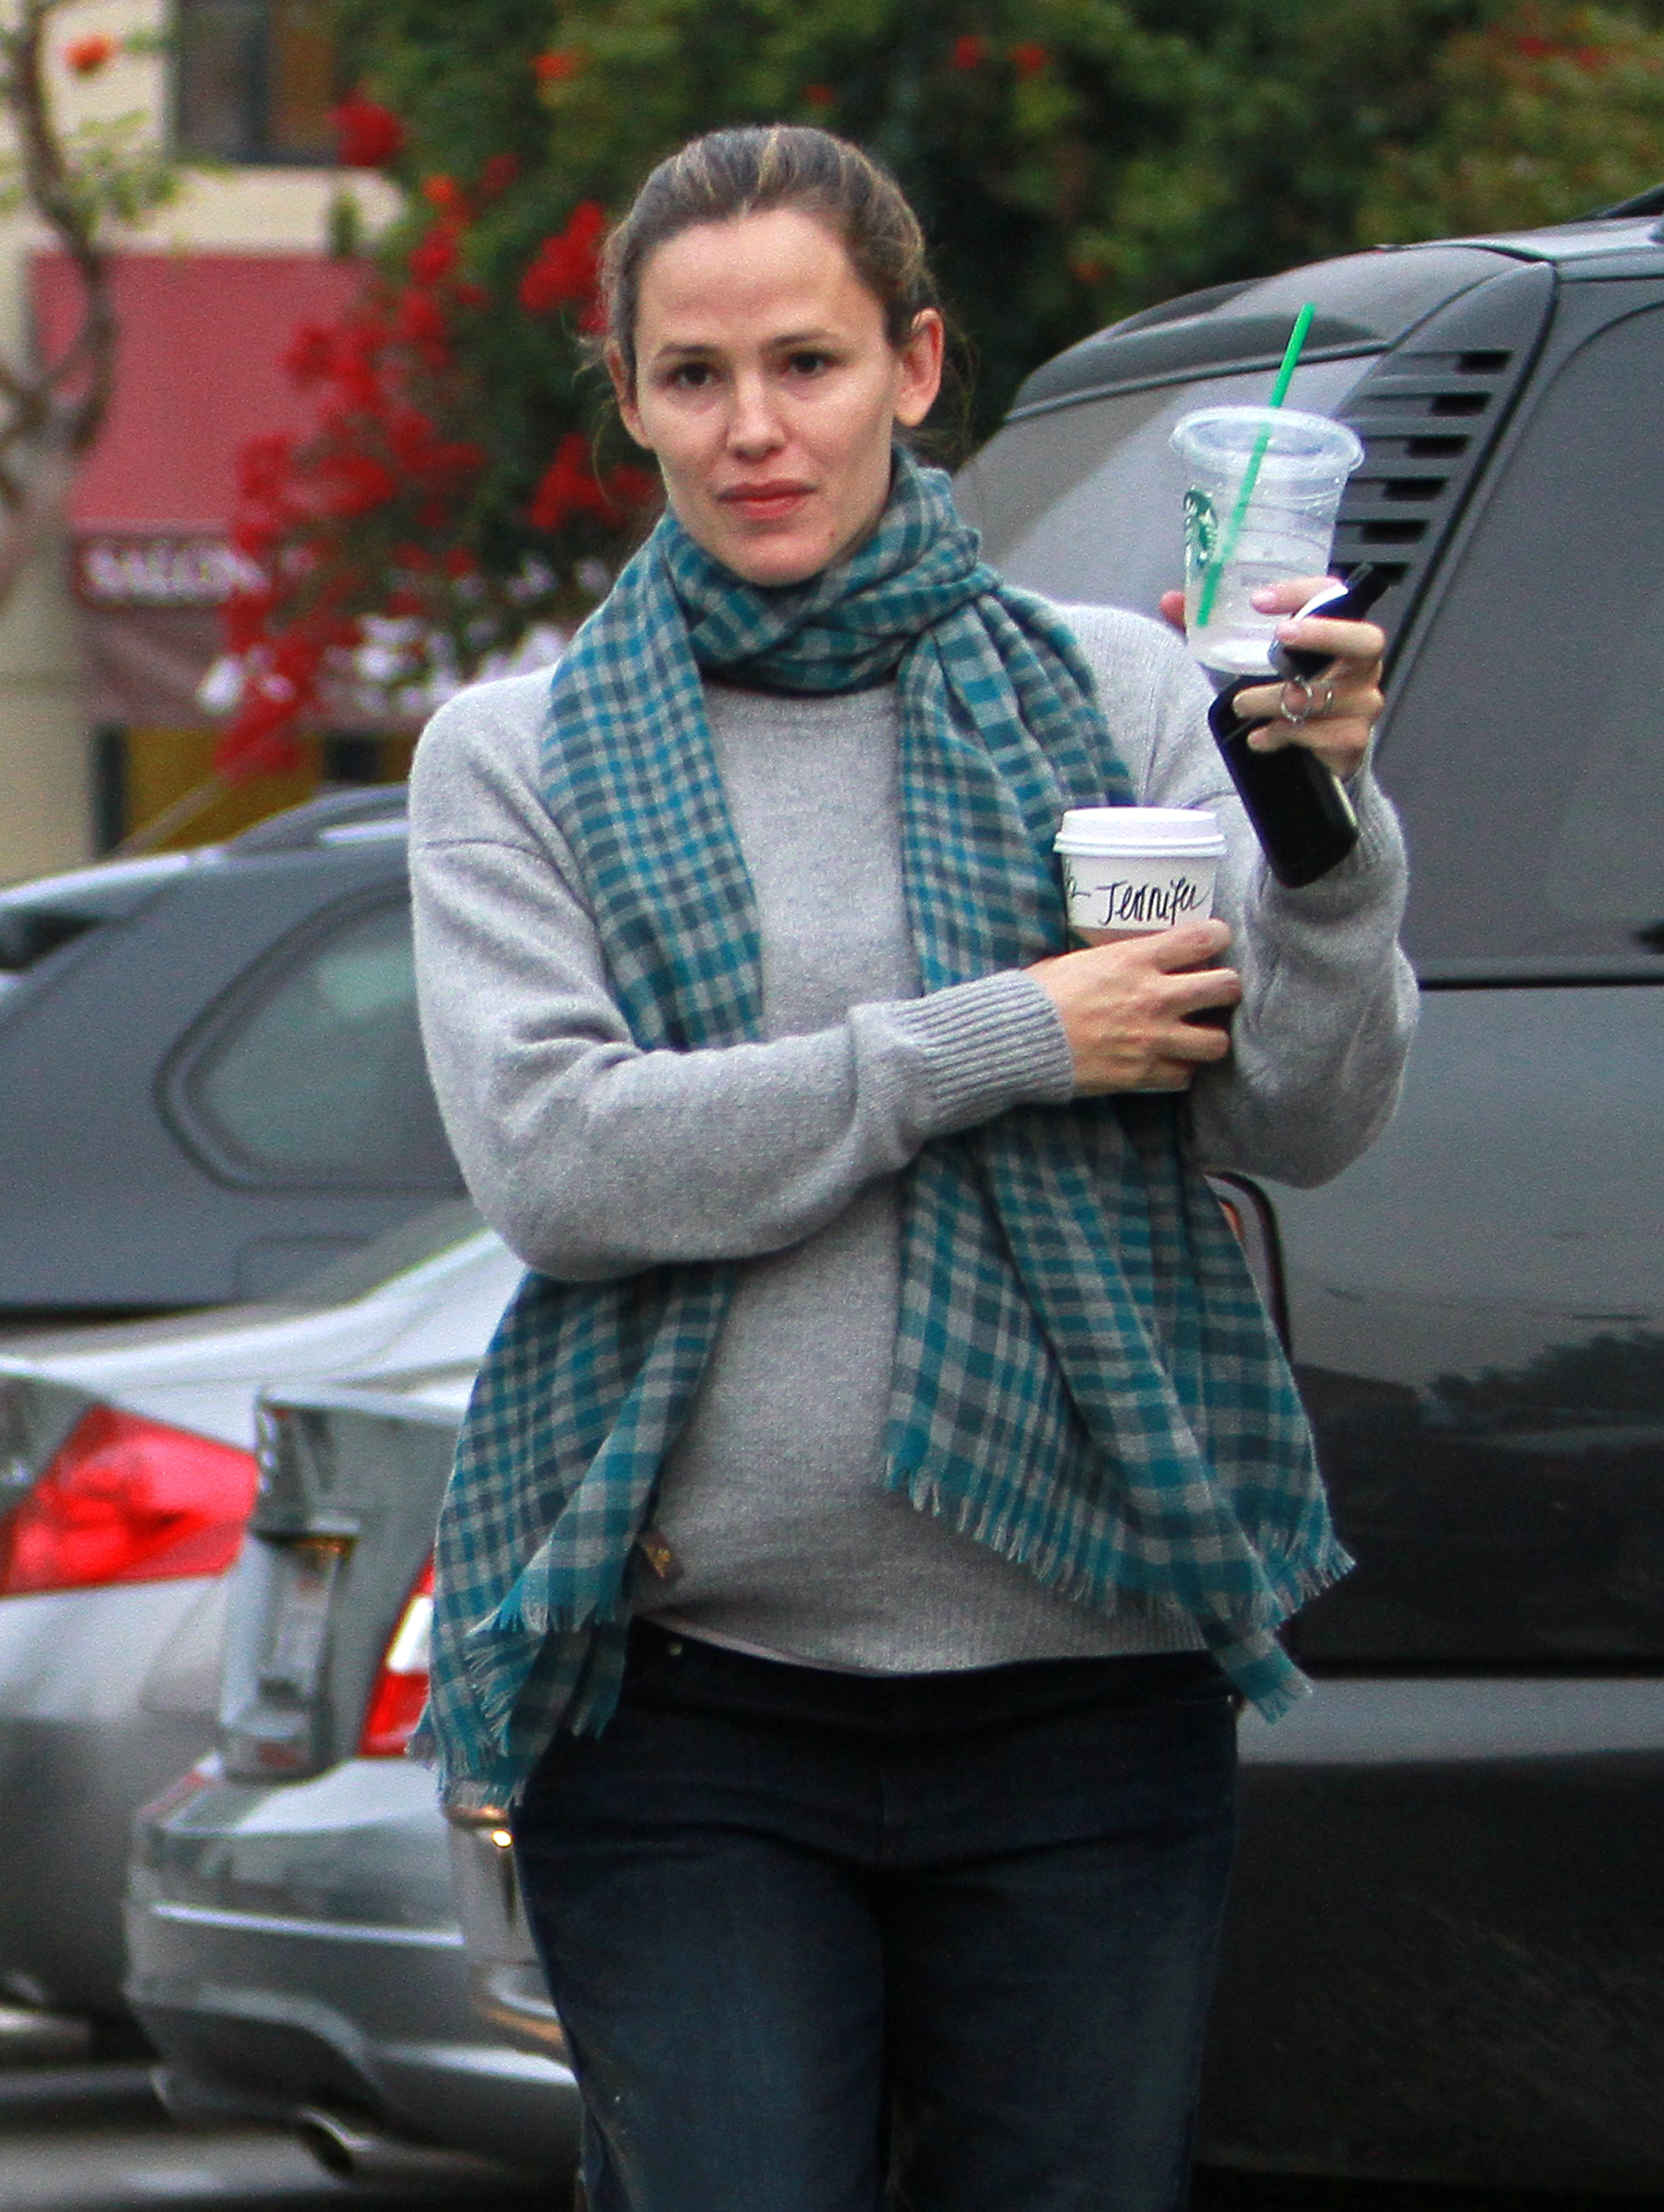 Jennifer Garner walks with a beverage in hand in Brentwood on October 24, 2011, in Los Angeles, California. | Source: Getty Images